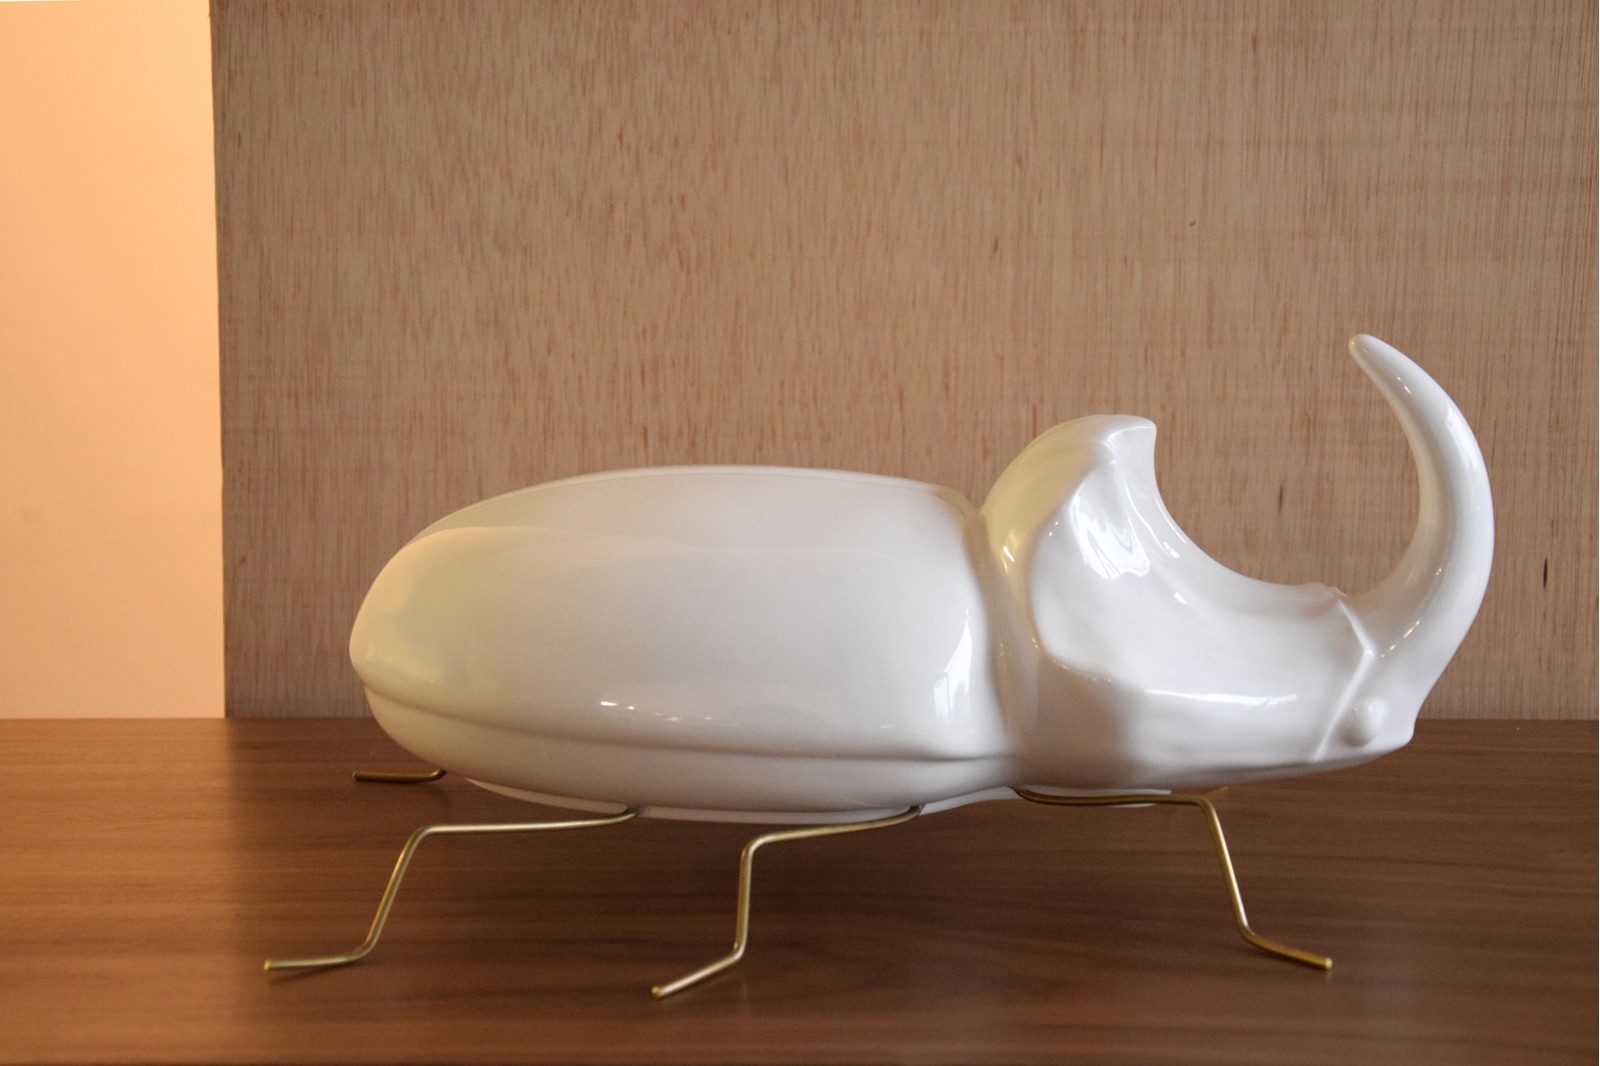 HORN BEETLE SCULPTURE. CERAMIC. GLOSSY WHITE